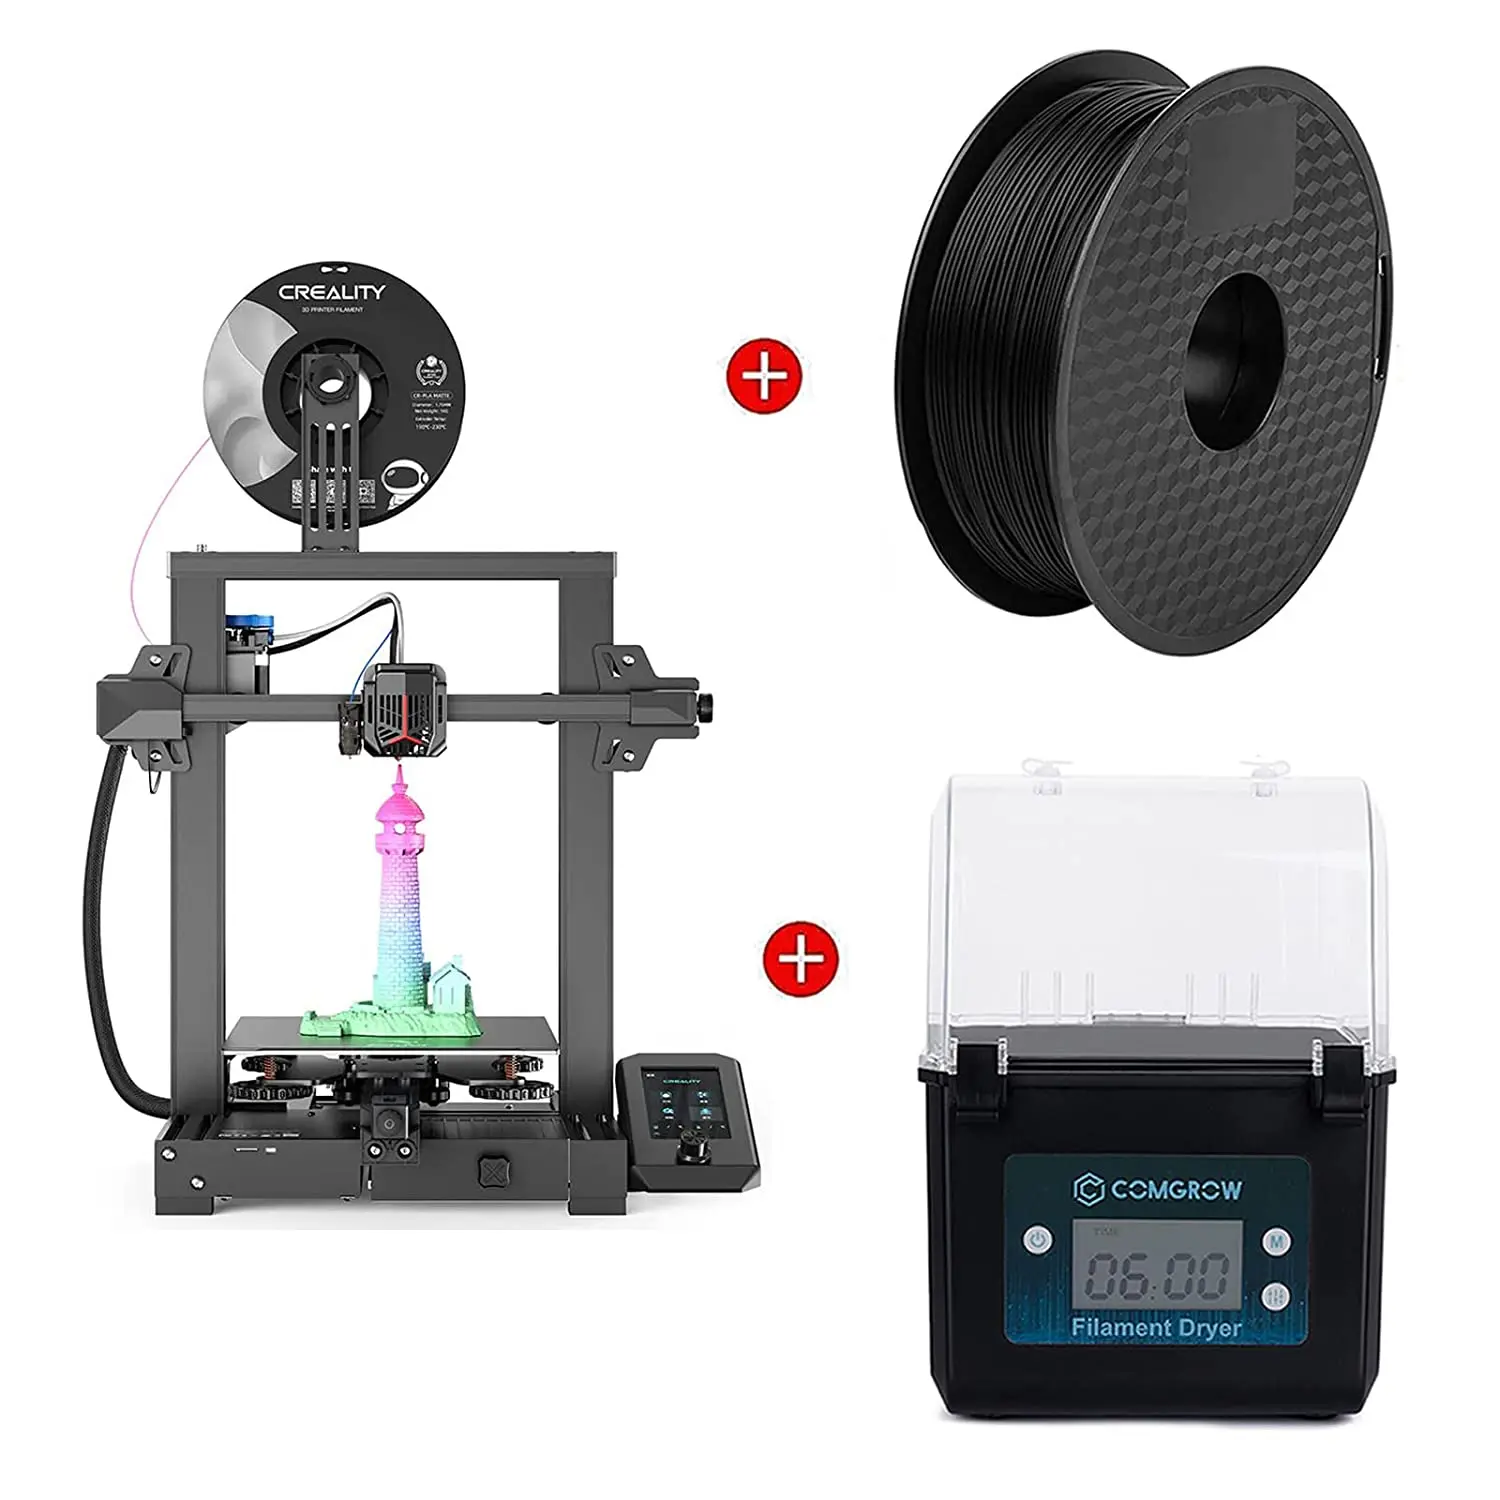 

new Creality Ender 3 V2 Neo 3D Printer with CR Touch Auto Leveling Kit and 3D Printer PLA Filament Black 1.75mm 1KG and 3D